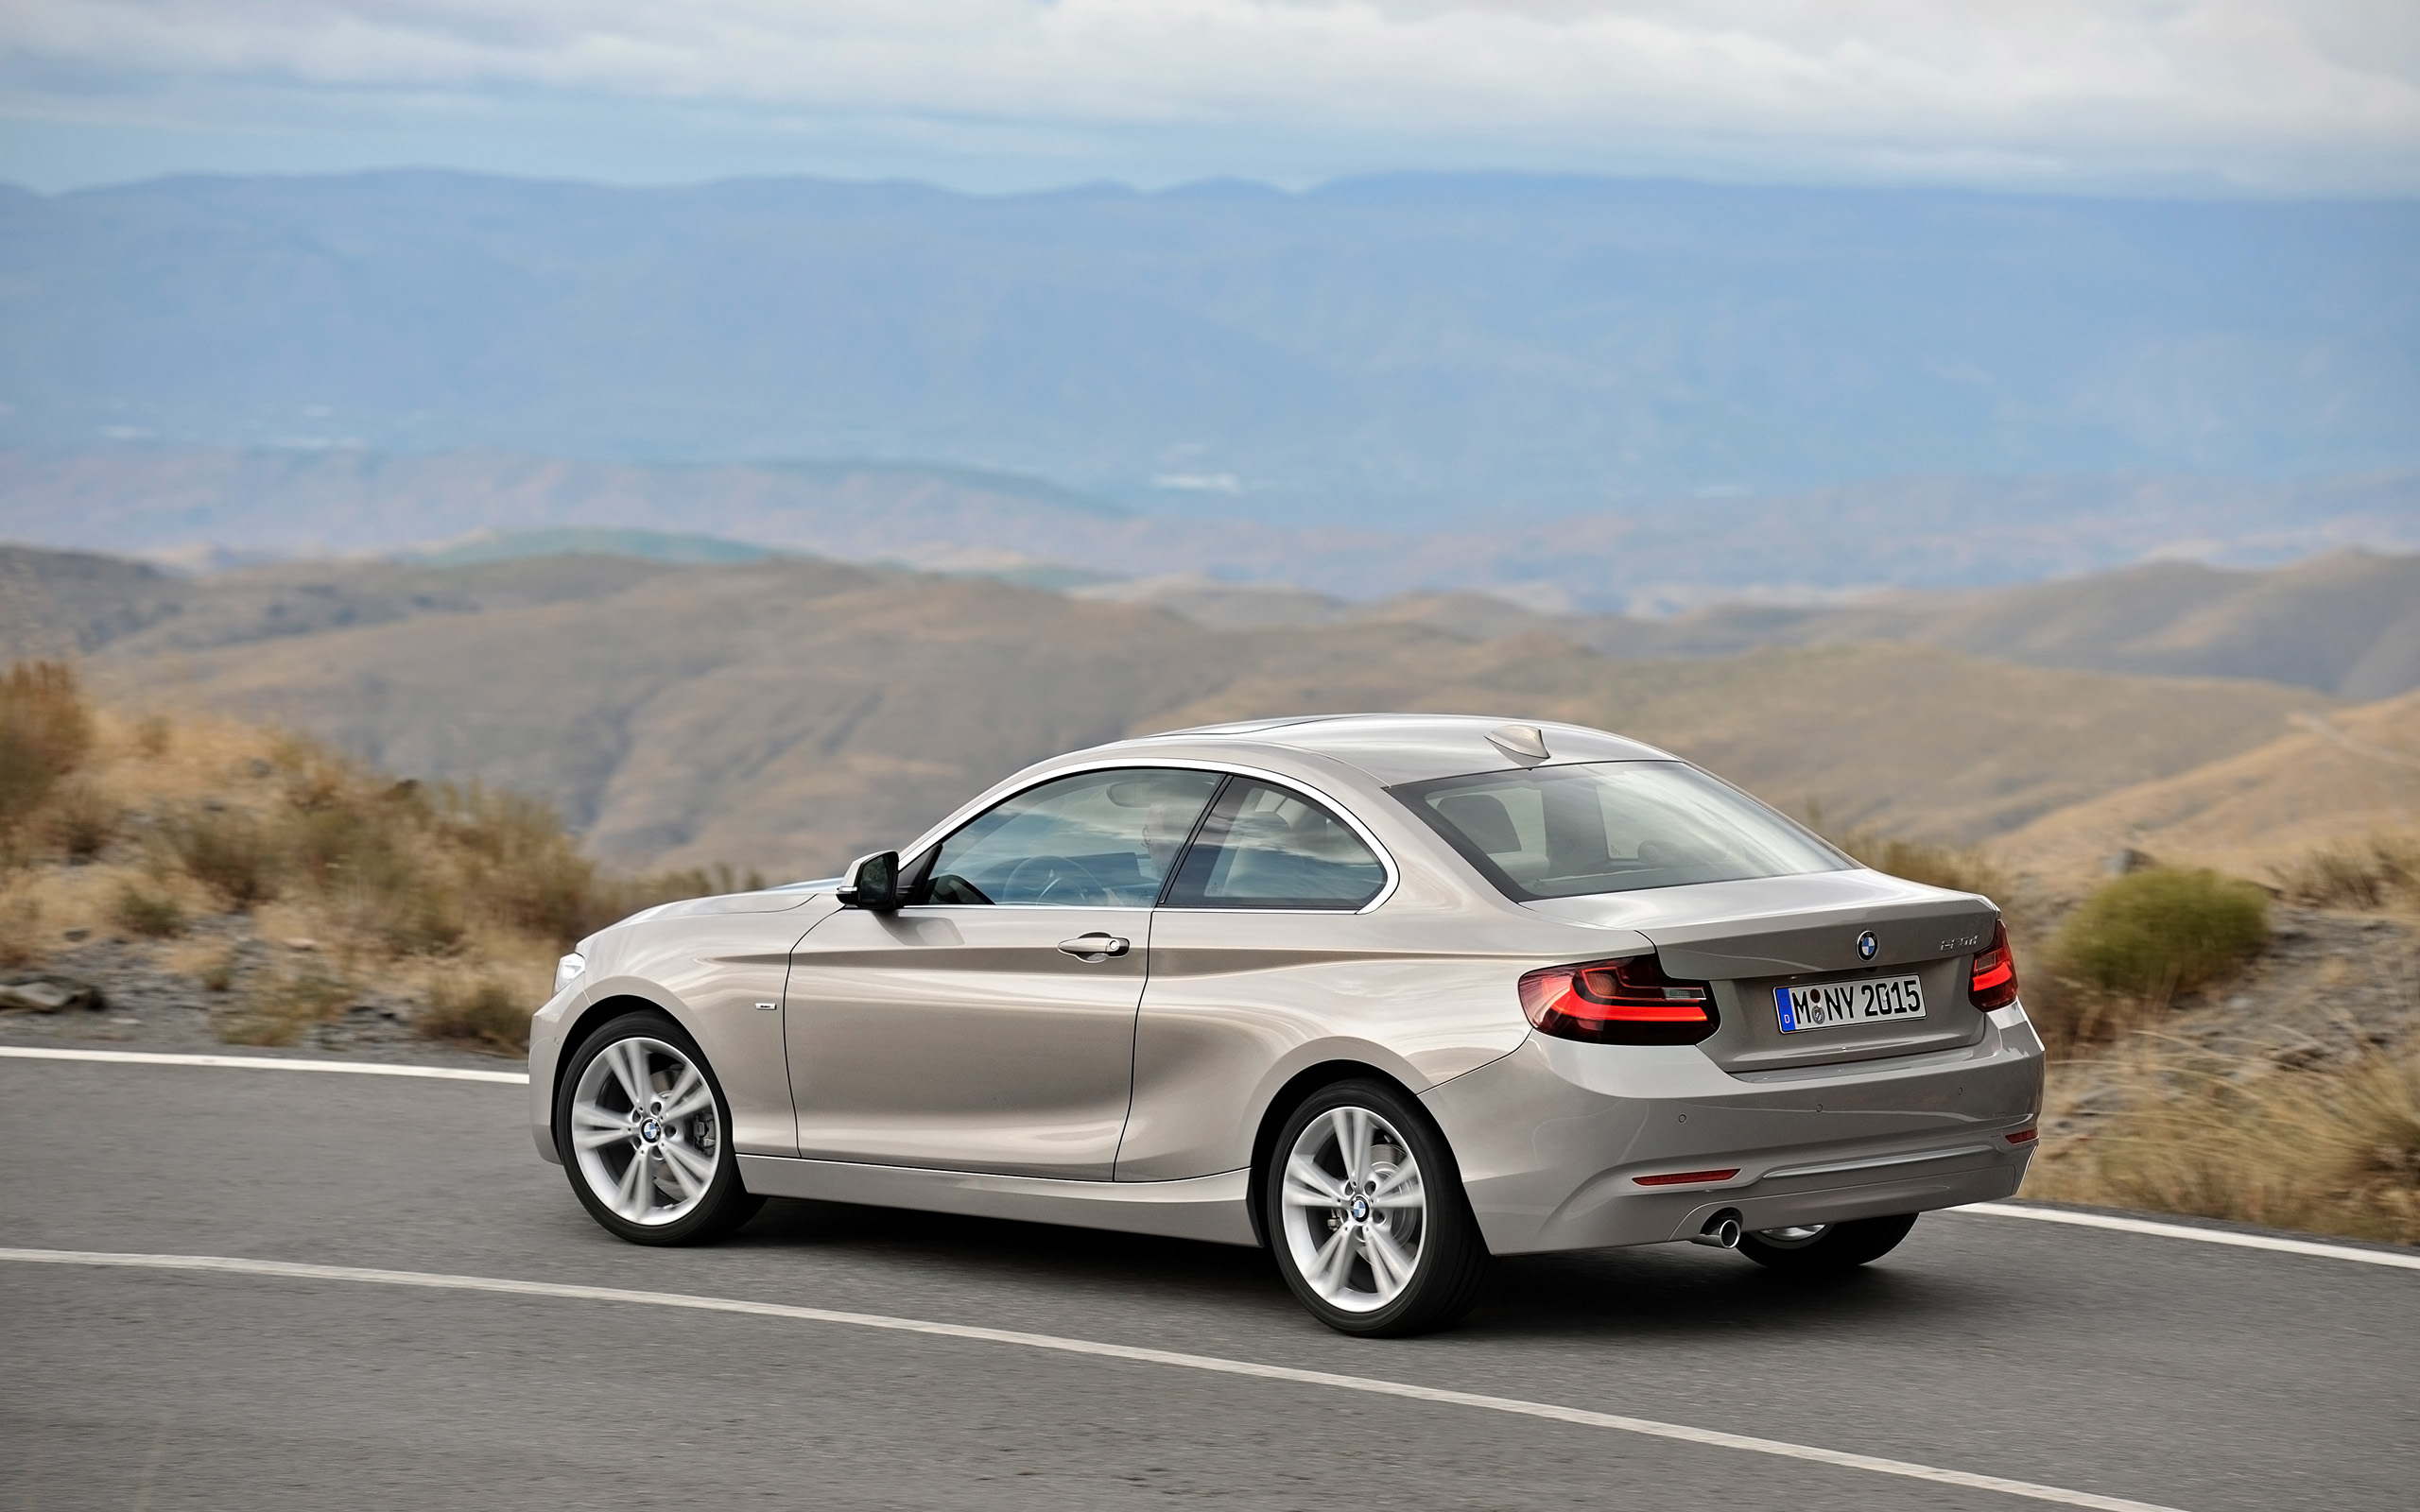 2014, Bmw, 2 series, Coupe, Jf Wallpaper